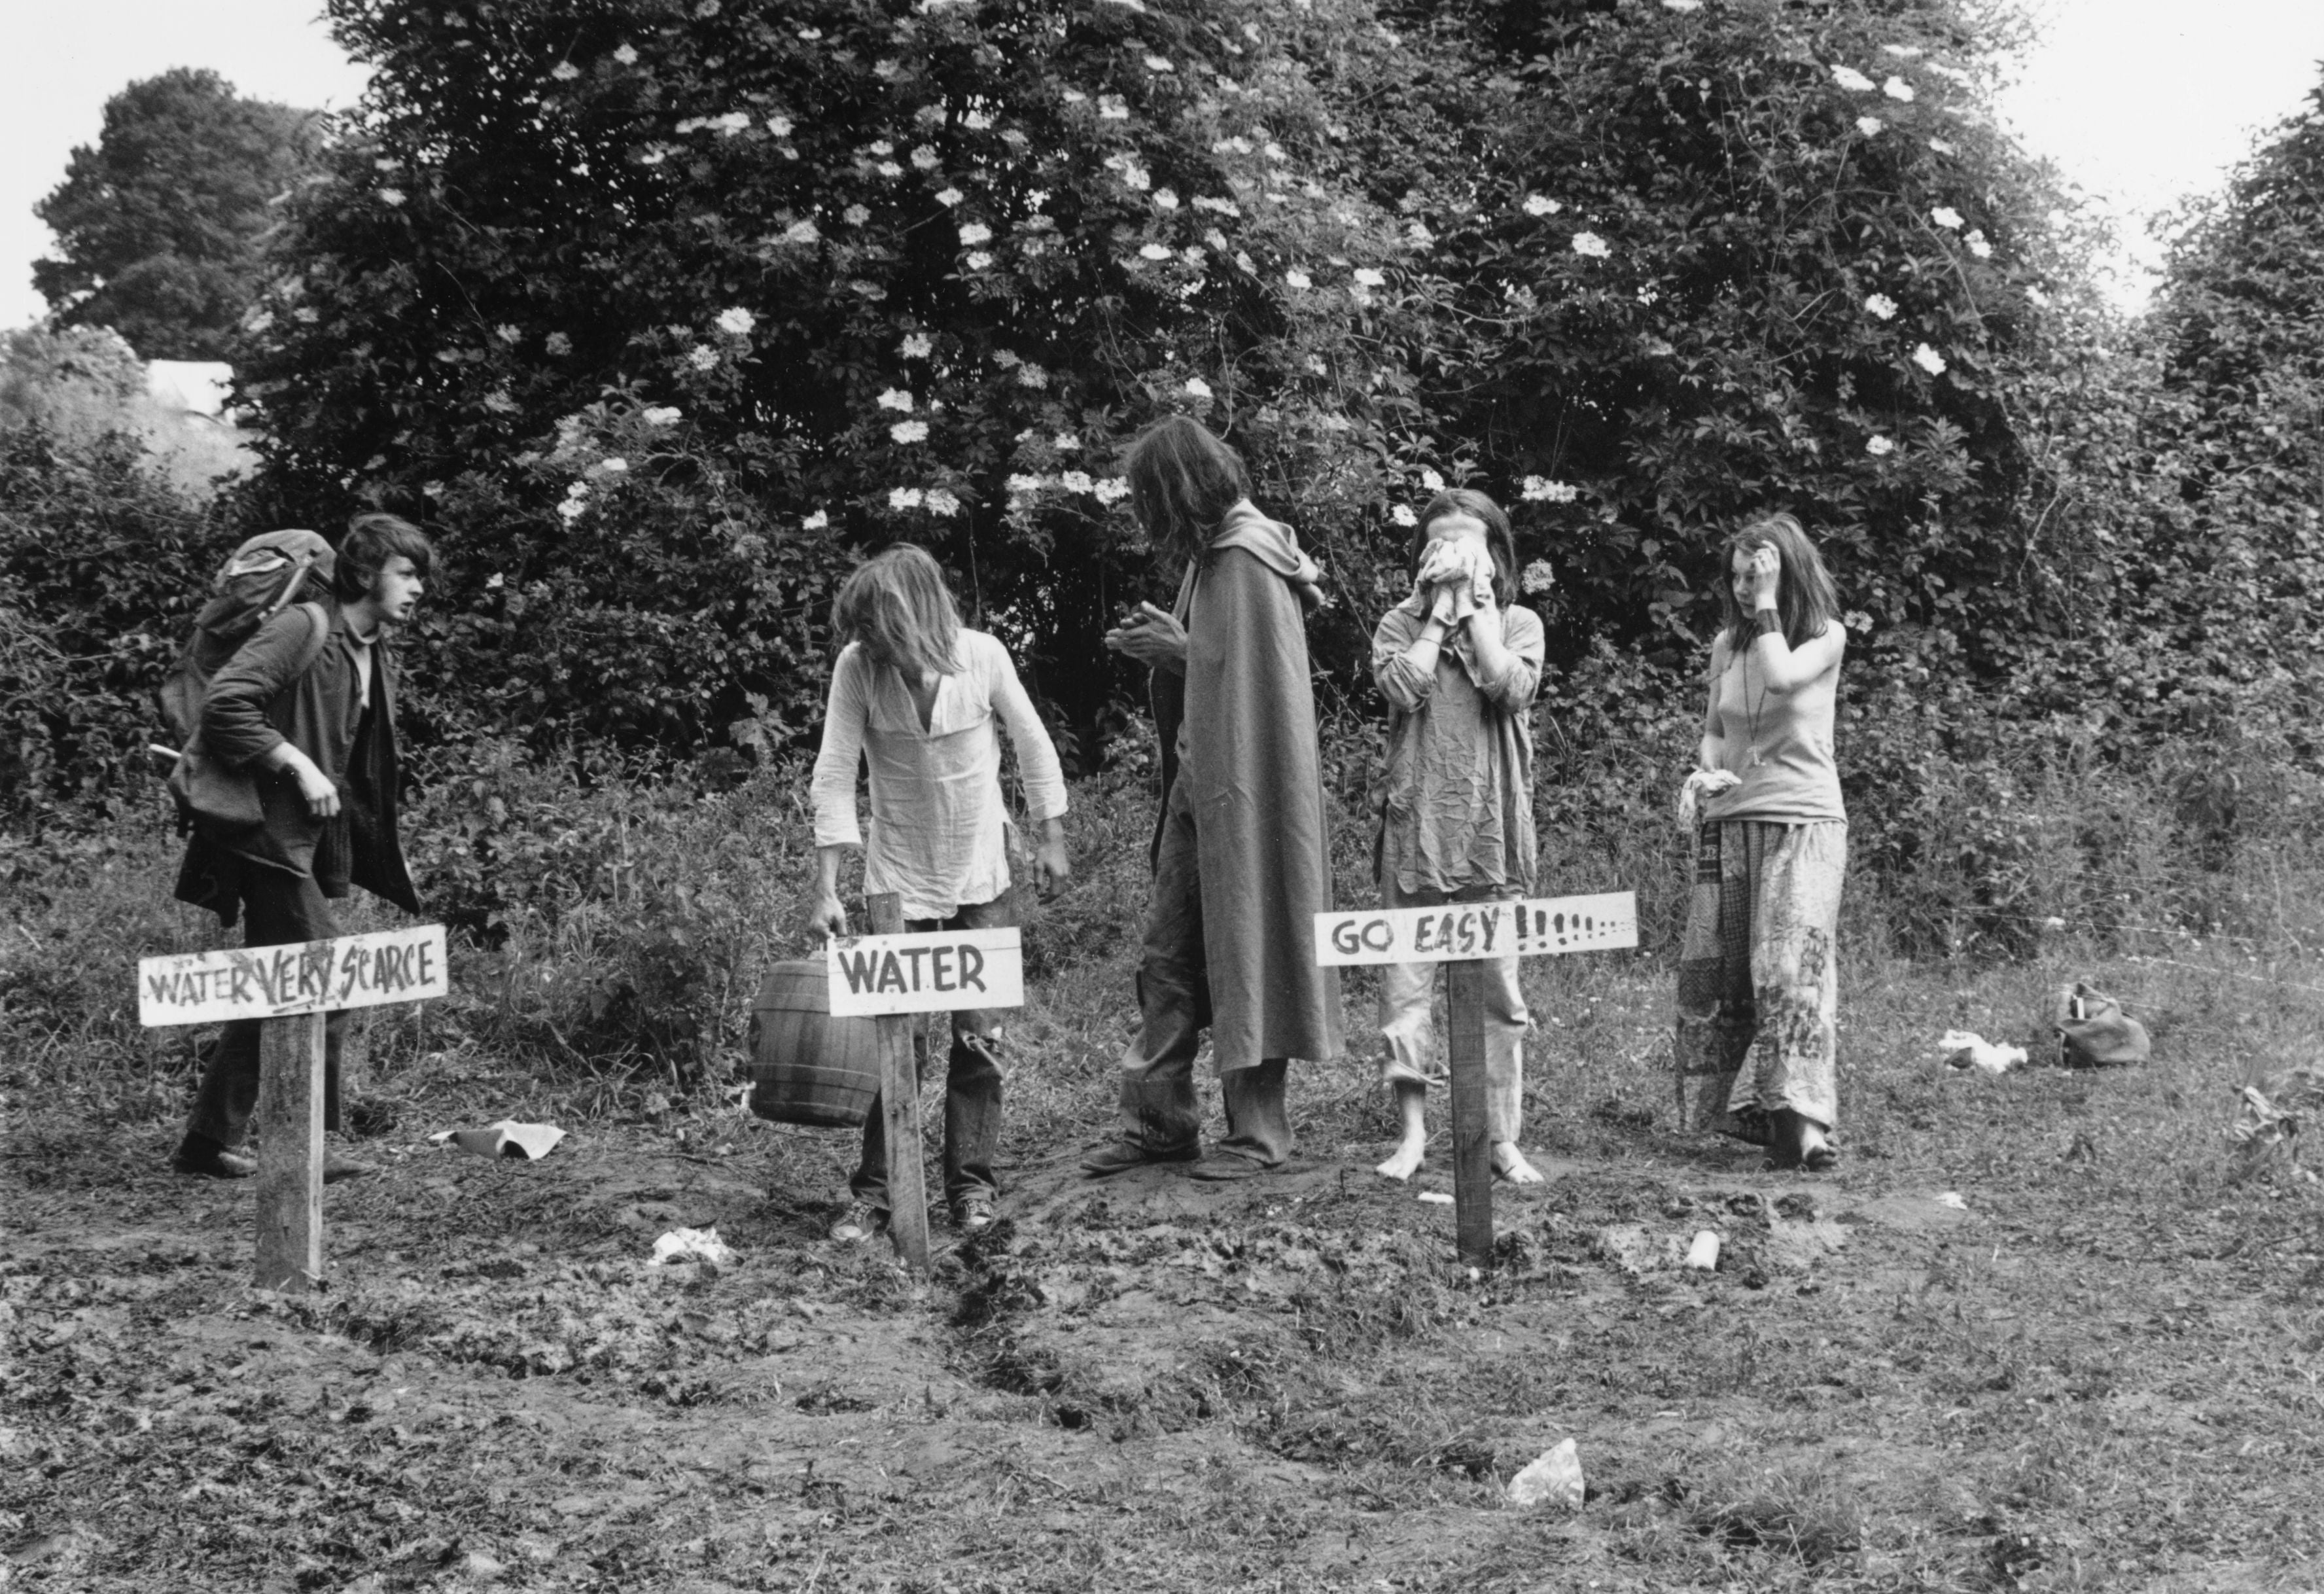 21st June 1971: Festival-goers washing and collecting water at one of the stand pipes at Glastonbury Festival